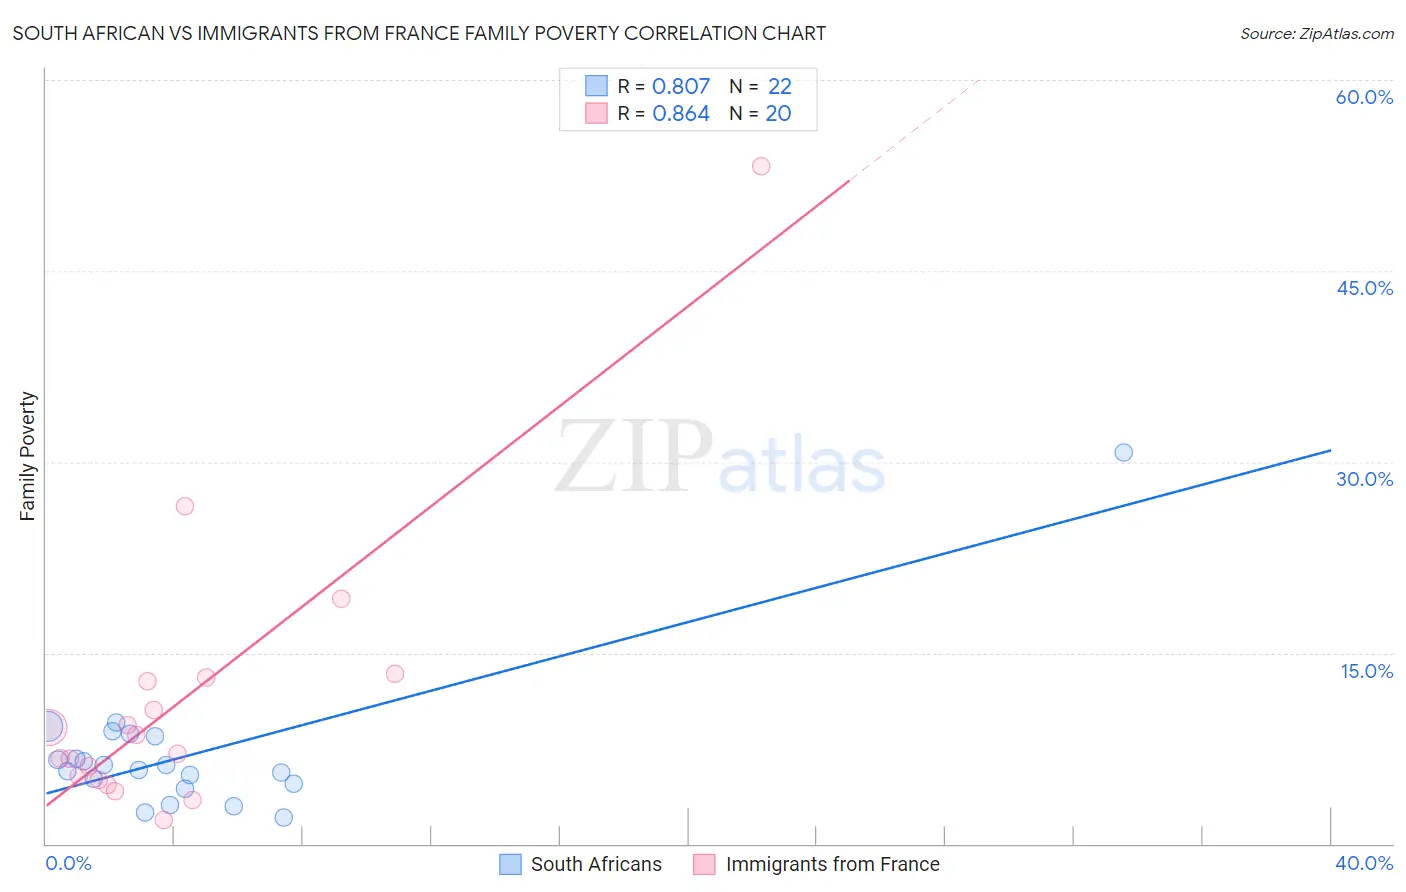 South African vs Immigrants from France Family Poverty